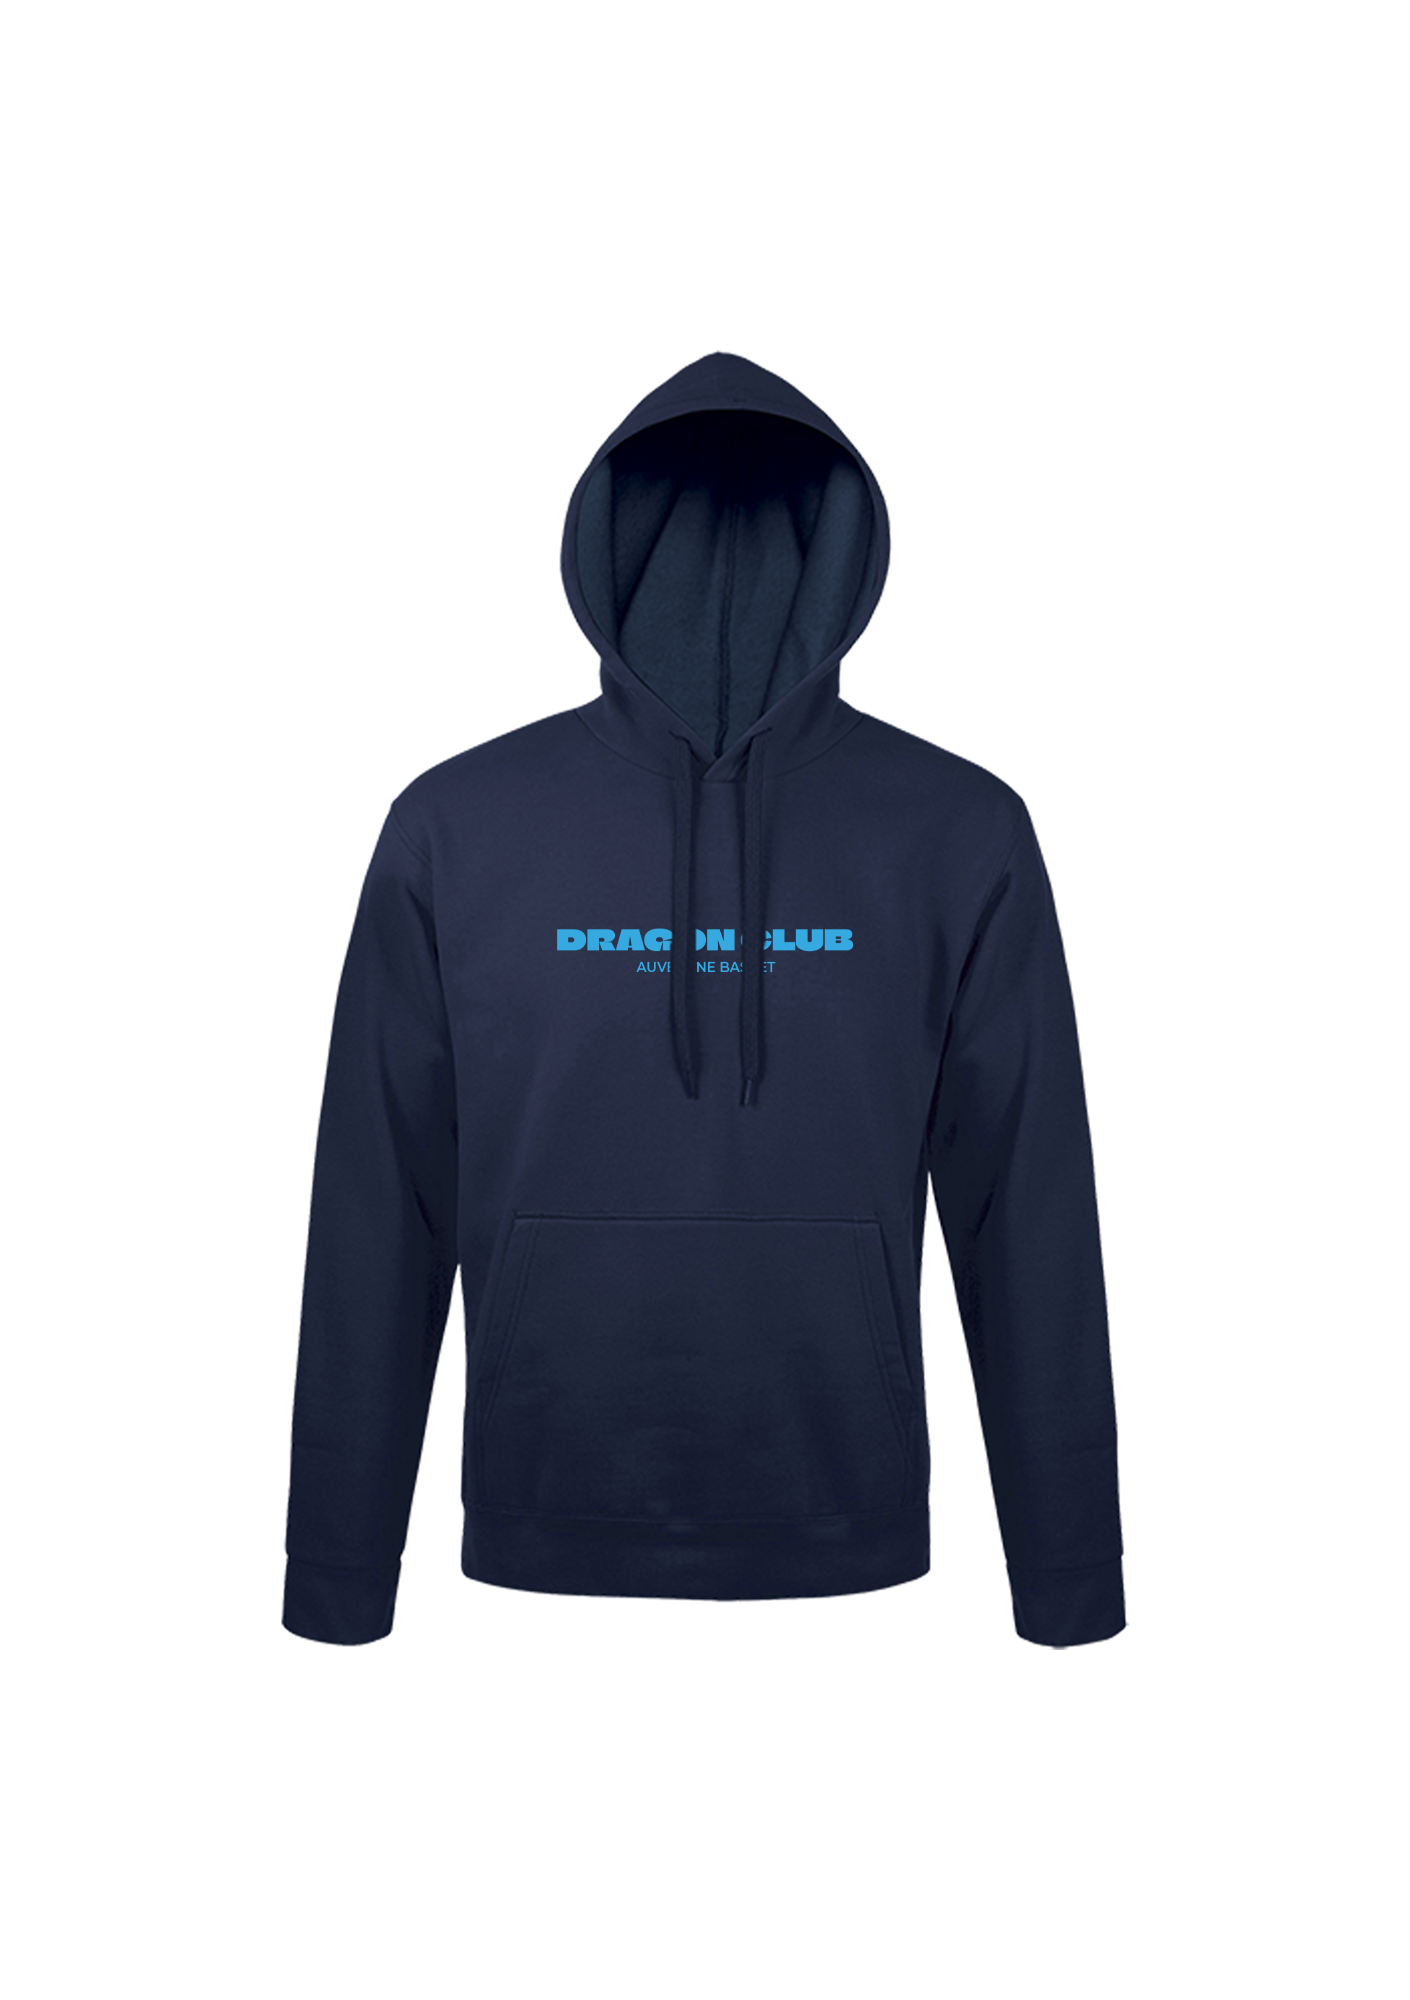 Sweat à capuche Adulte French Navy collection "Oneal" - MOCKUP-DCA-HOODIE-SNAKE-FRENCH-MARINE-A